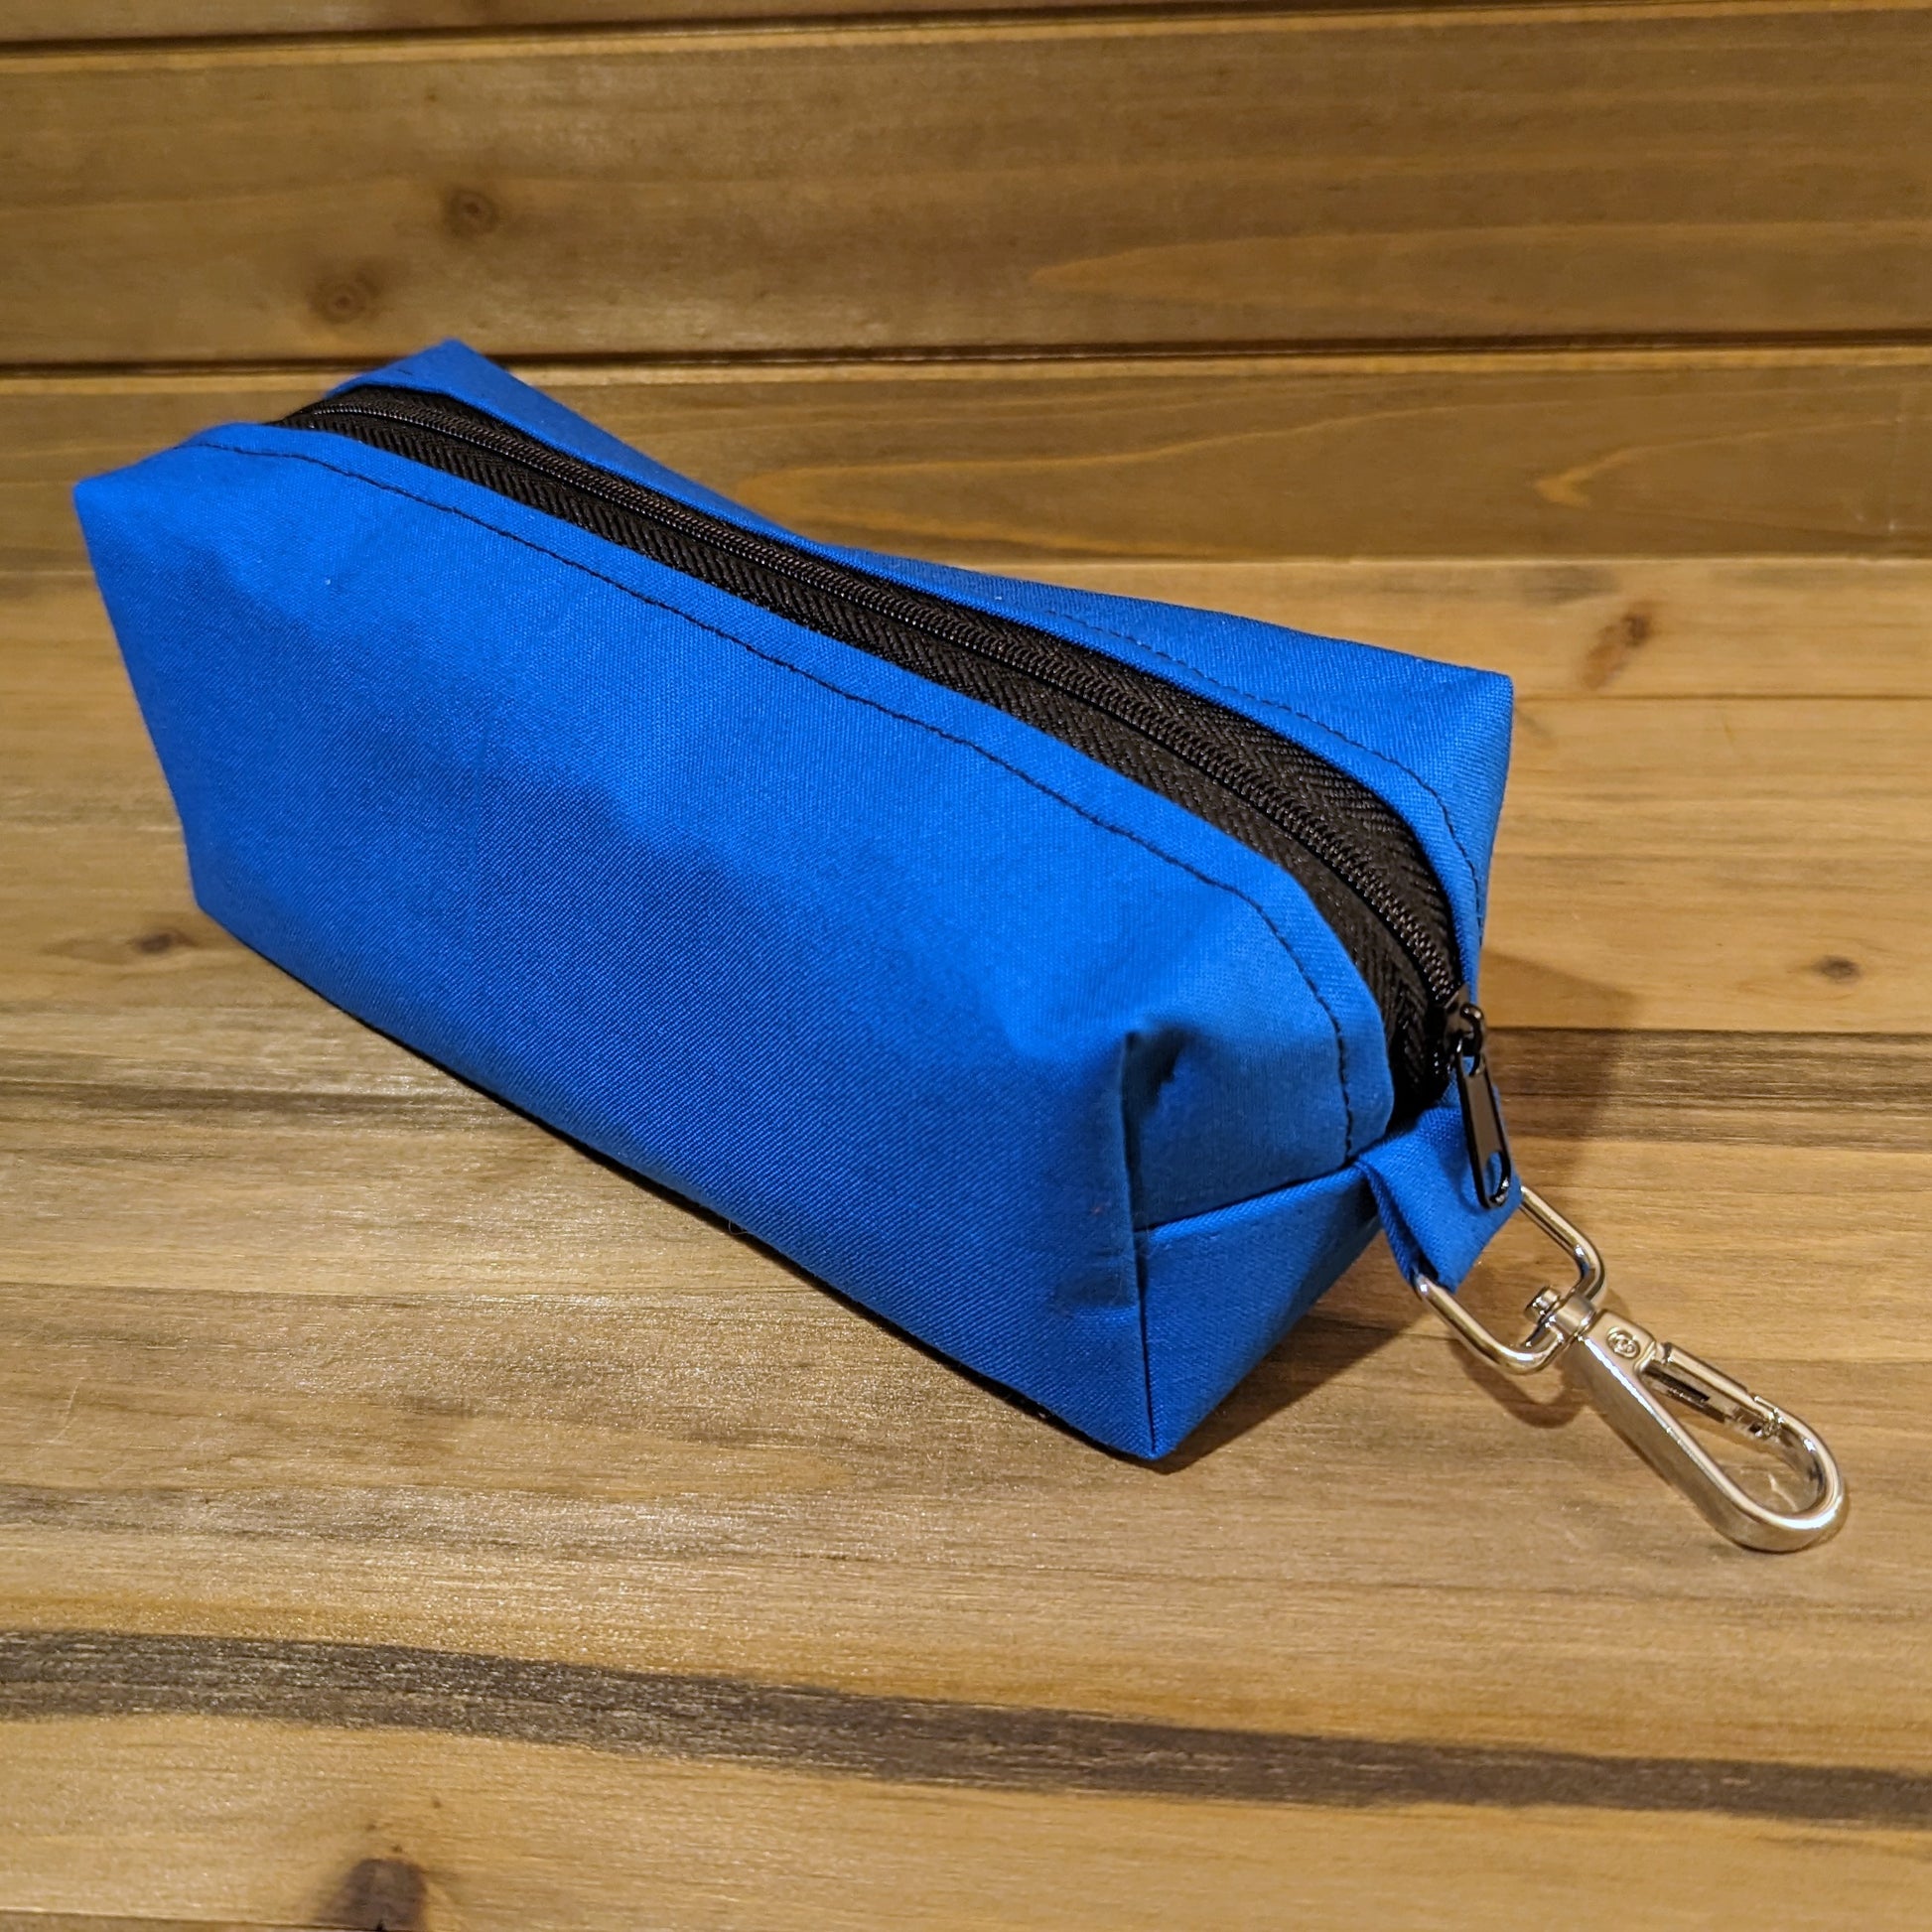 A view of the blue Bag of Devouring with a black zipper down the middle and a keychain clip at the top.